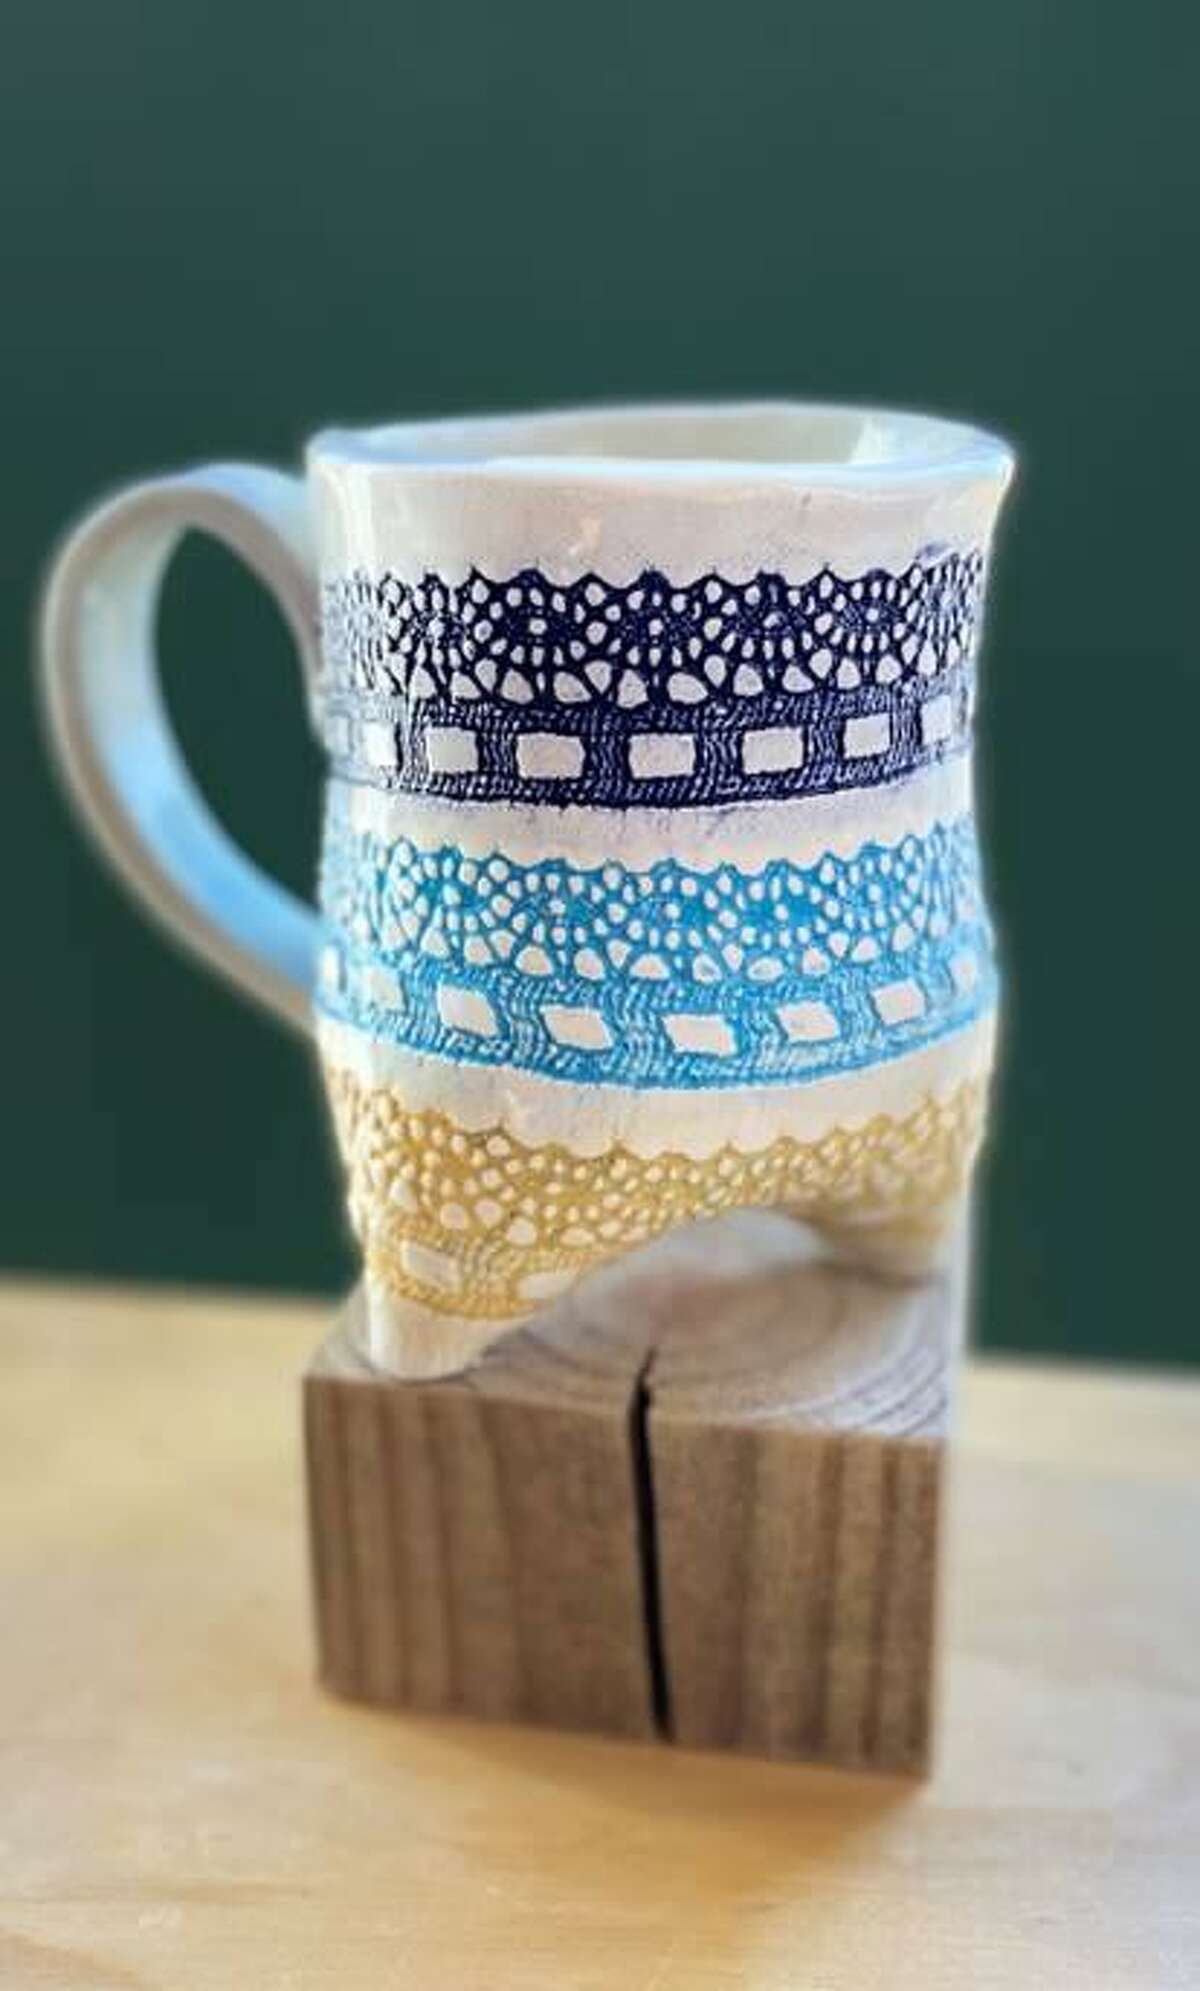 The Gallery 25 and Creative Arts Studio in New Milford, is having a “Make Your Own Mug” pottery workshop from 7 until 8:30 p.m. on Thursday, Aug. 19, by Roberta Ahuja, of Newtown. Pictured is a mug from Ahuja.